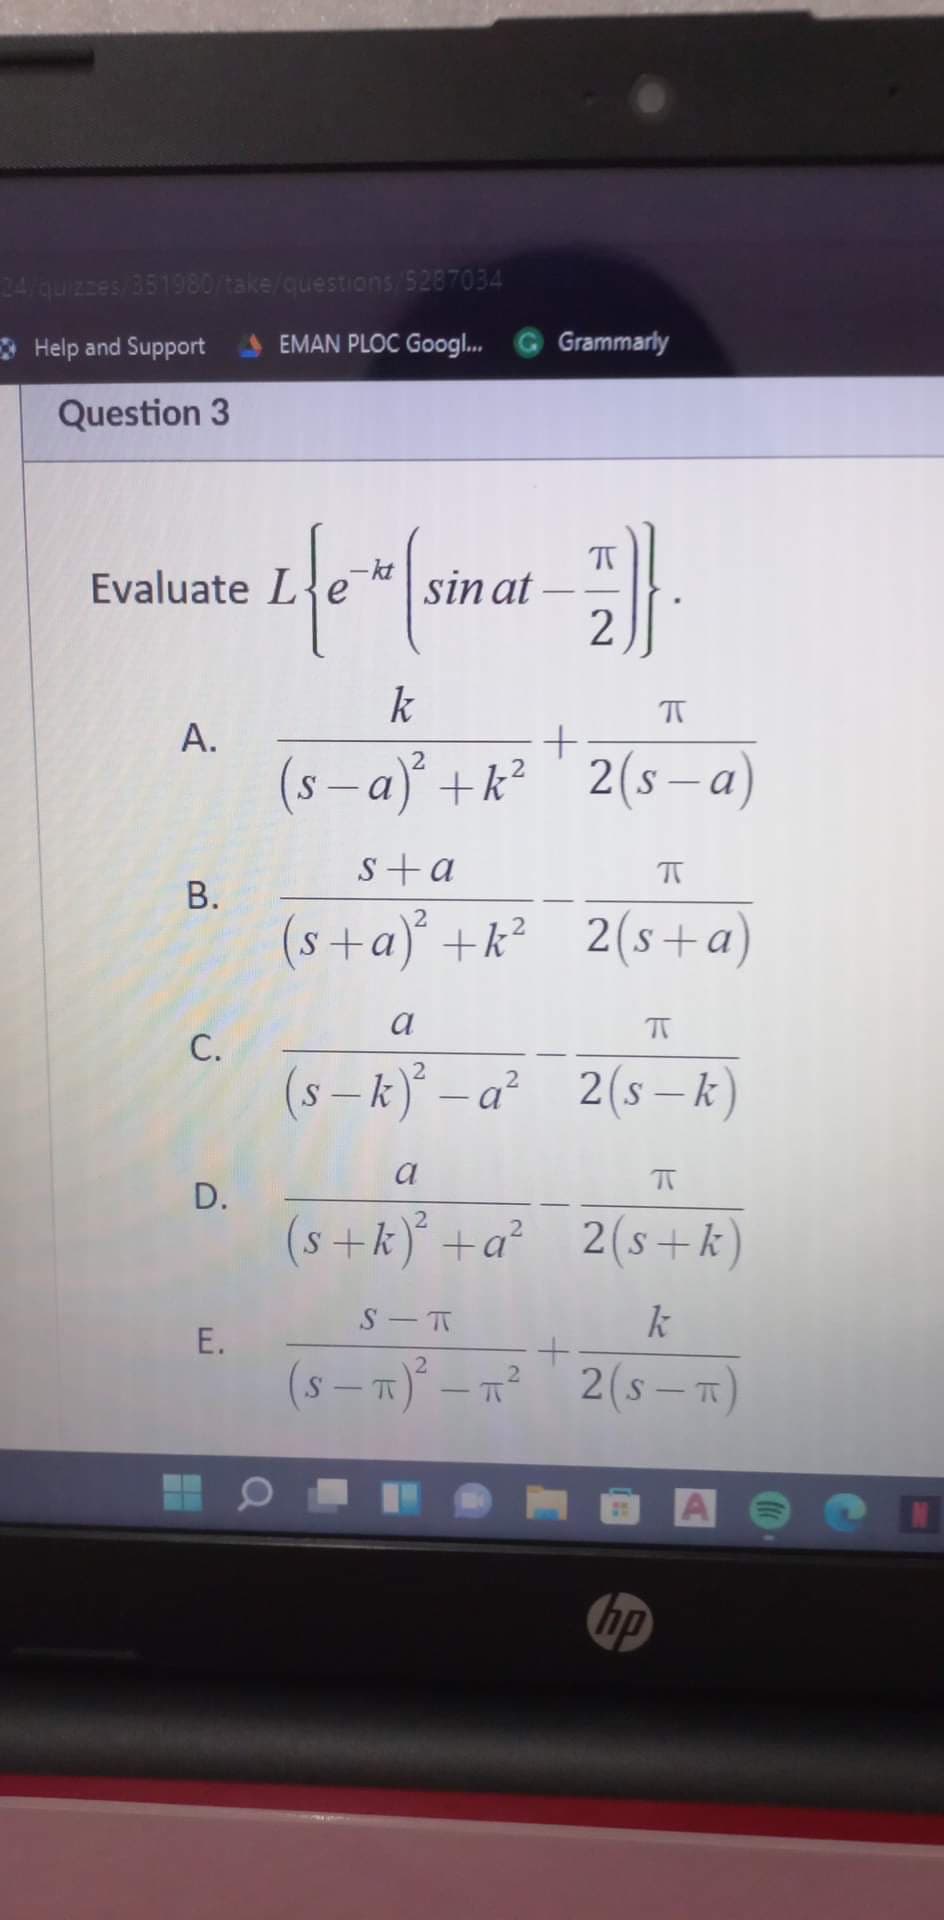 24quizzes 351980/take/questions/5287034
* Help and Support
EMAN PLOC Googl.
Grammarly
Question 3
-kt
Evaluate L{e
sin at
2
k
A.
(s – a)° +k² ' 2(s –a)
s+a
(s+a)° +k² 2(s+a)
a
C.
(s – k) – a² 2(s¬ k)
|
D.
(s+k)° +a² 2(s+k)
k
(s - T)° – n² 2(s– T)
hp
B.
E.
